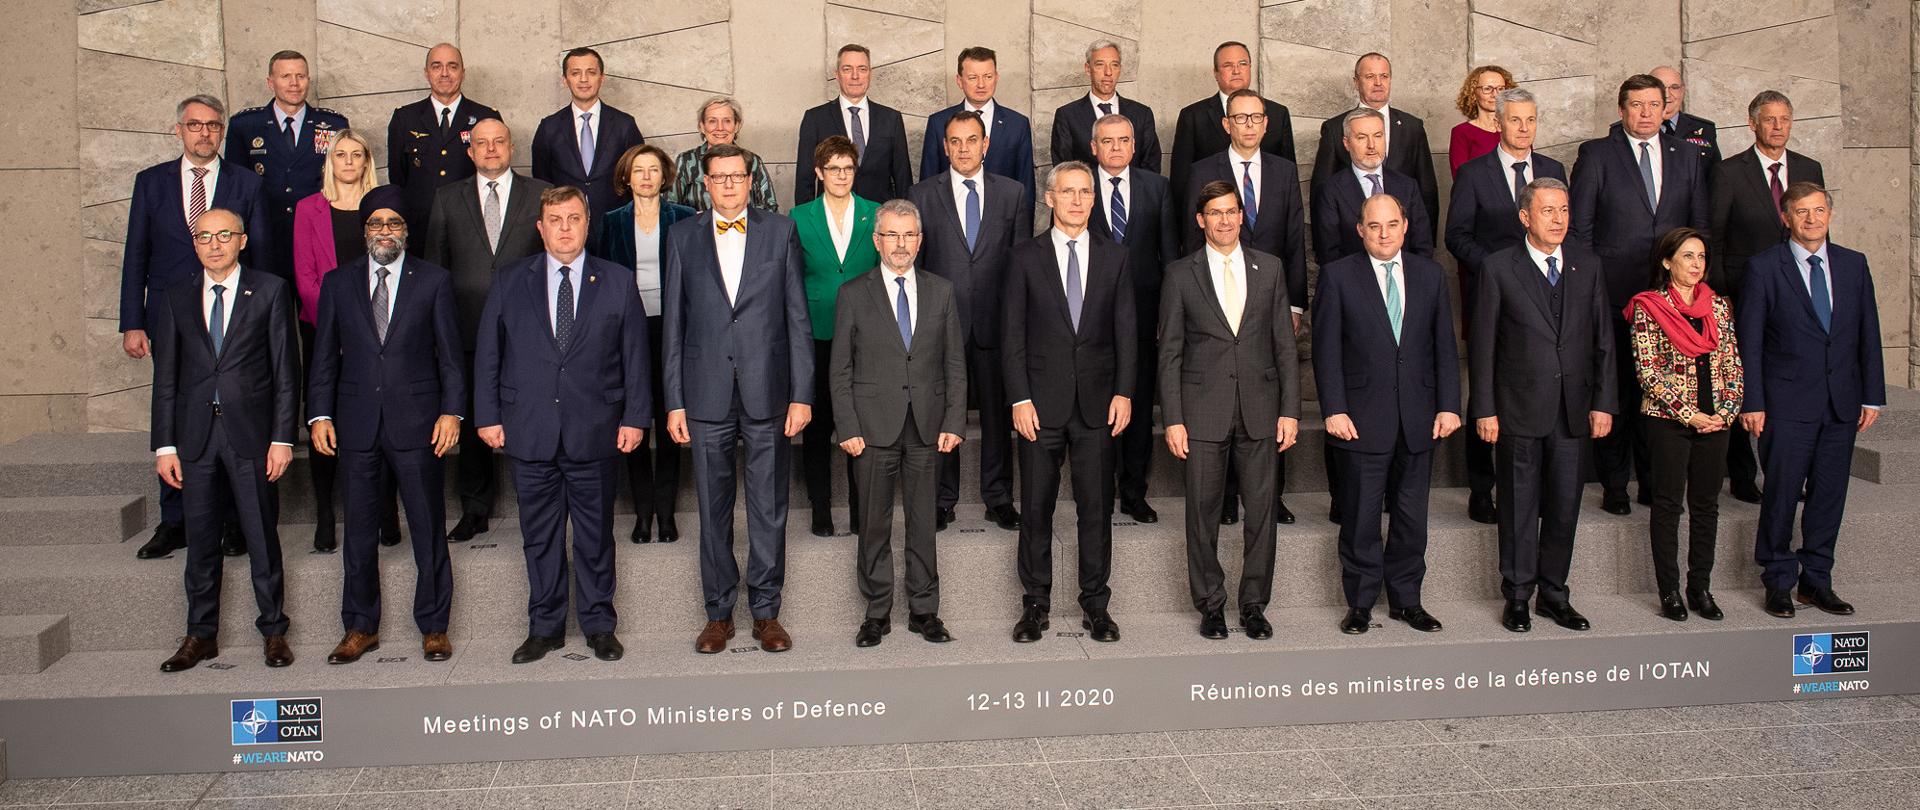 NATO Defense Ministers Meeting, February 2020